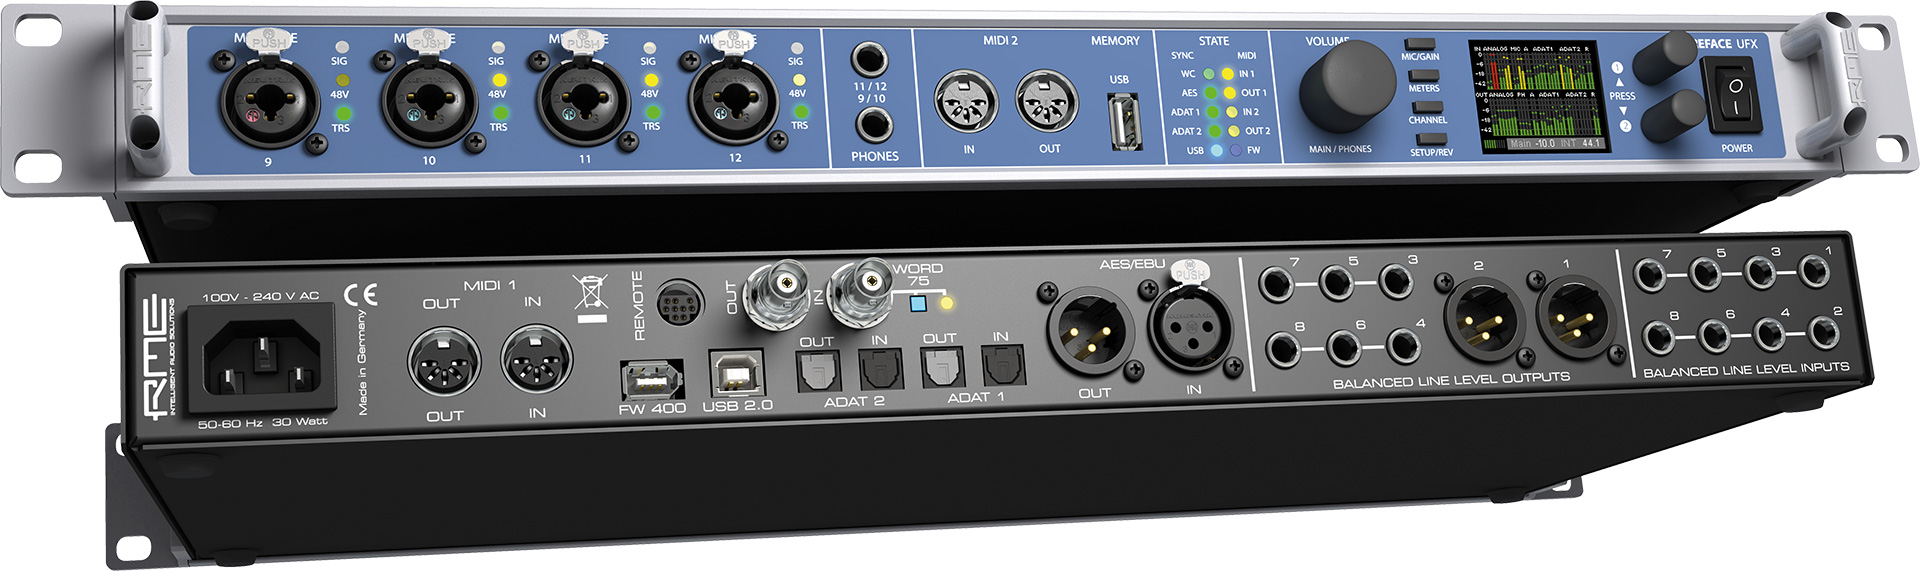 RME - Fireface UFX کارت صدا